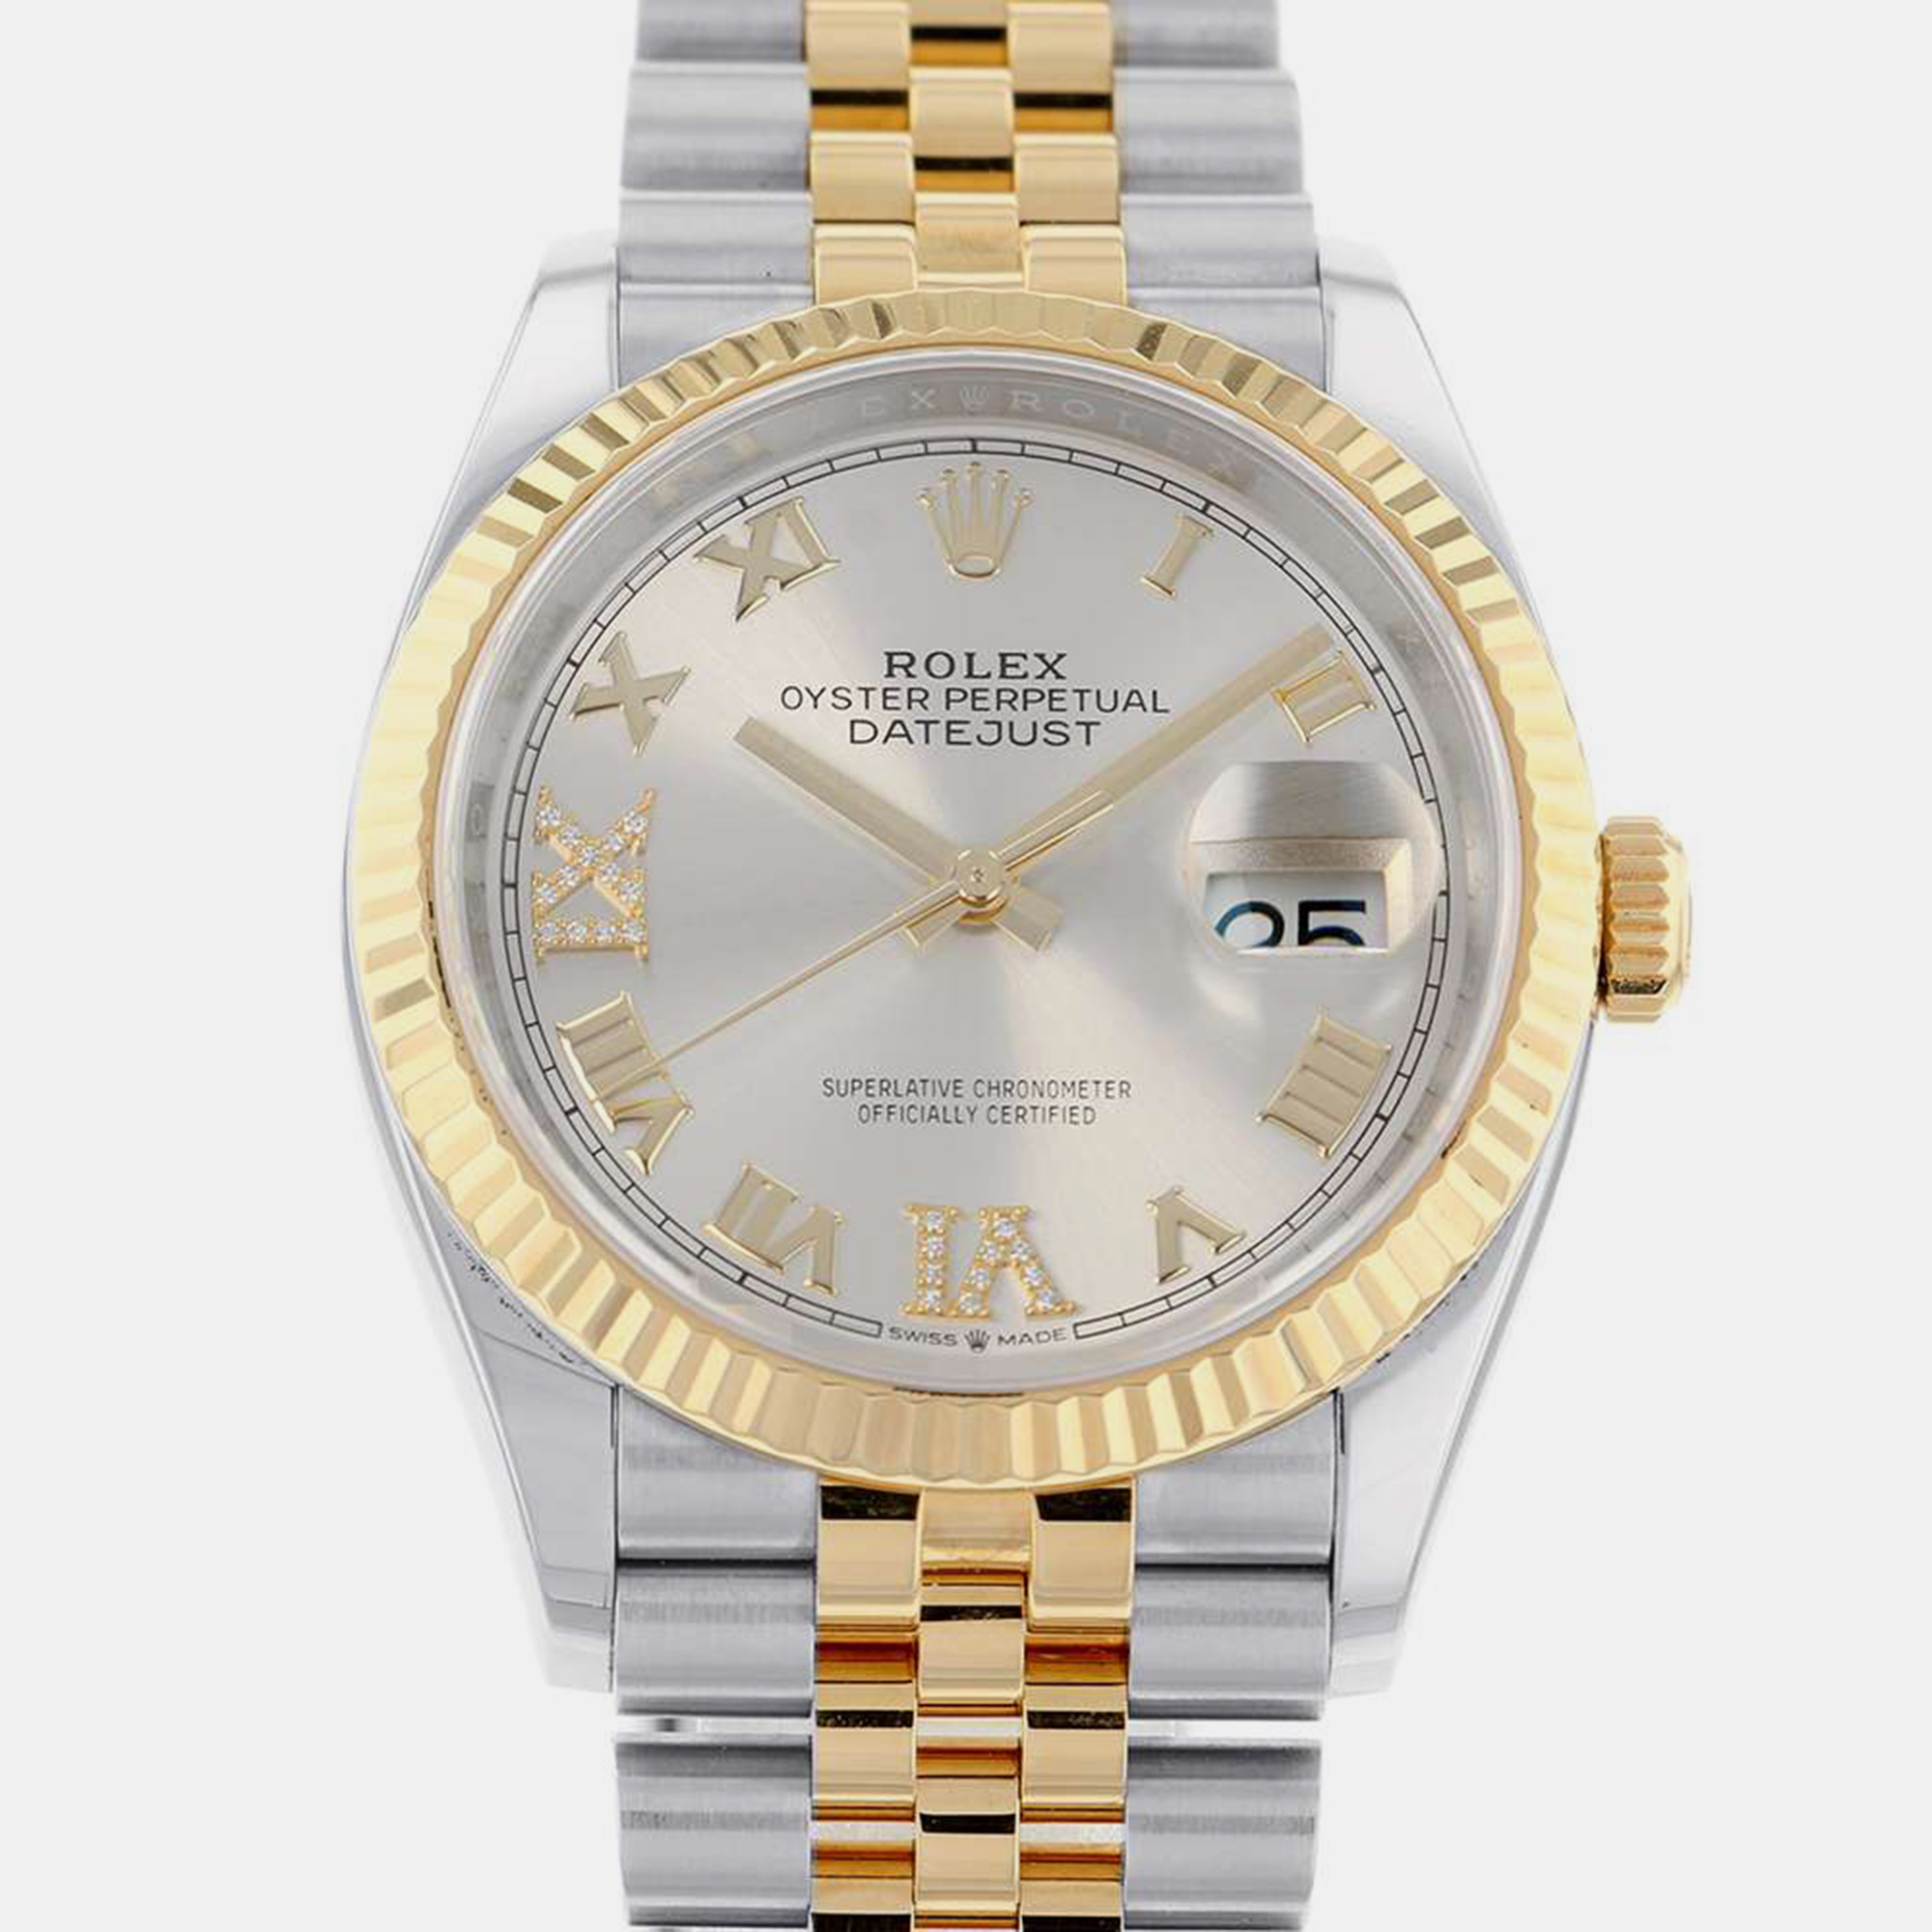 Rolex Silver 18k Yellow Gold And Stainless Steel Datejust 126233 Automatic Men's Wristwatch 36 Mm